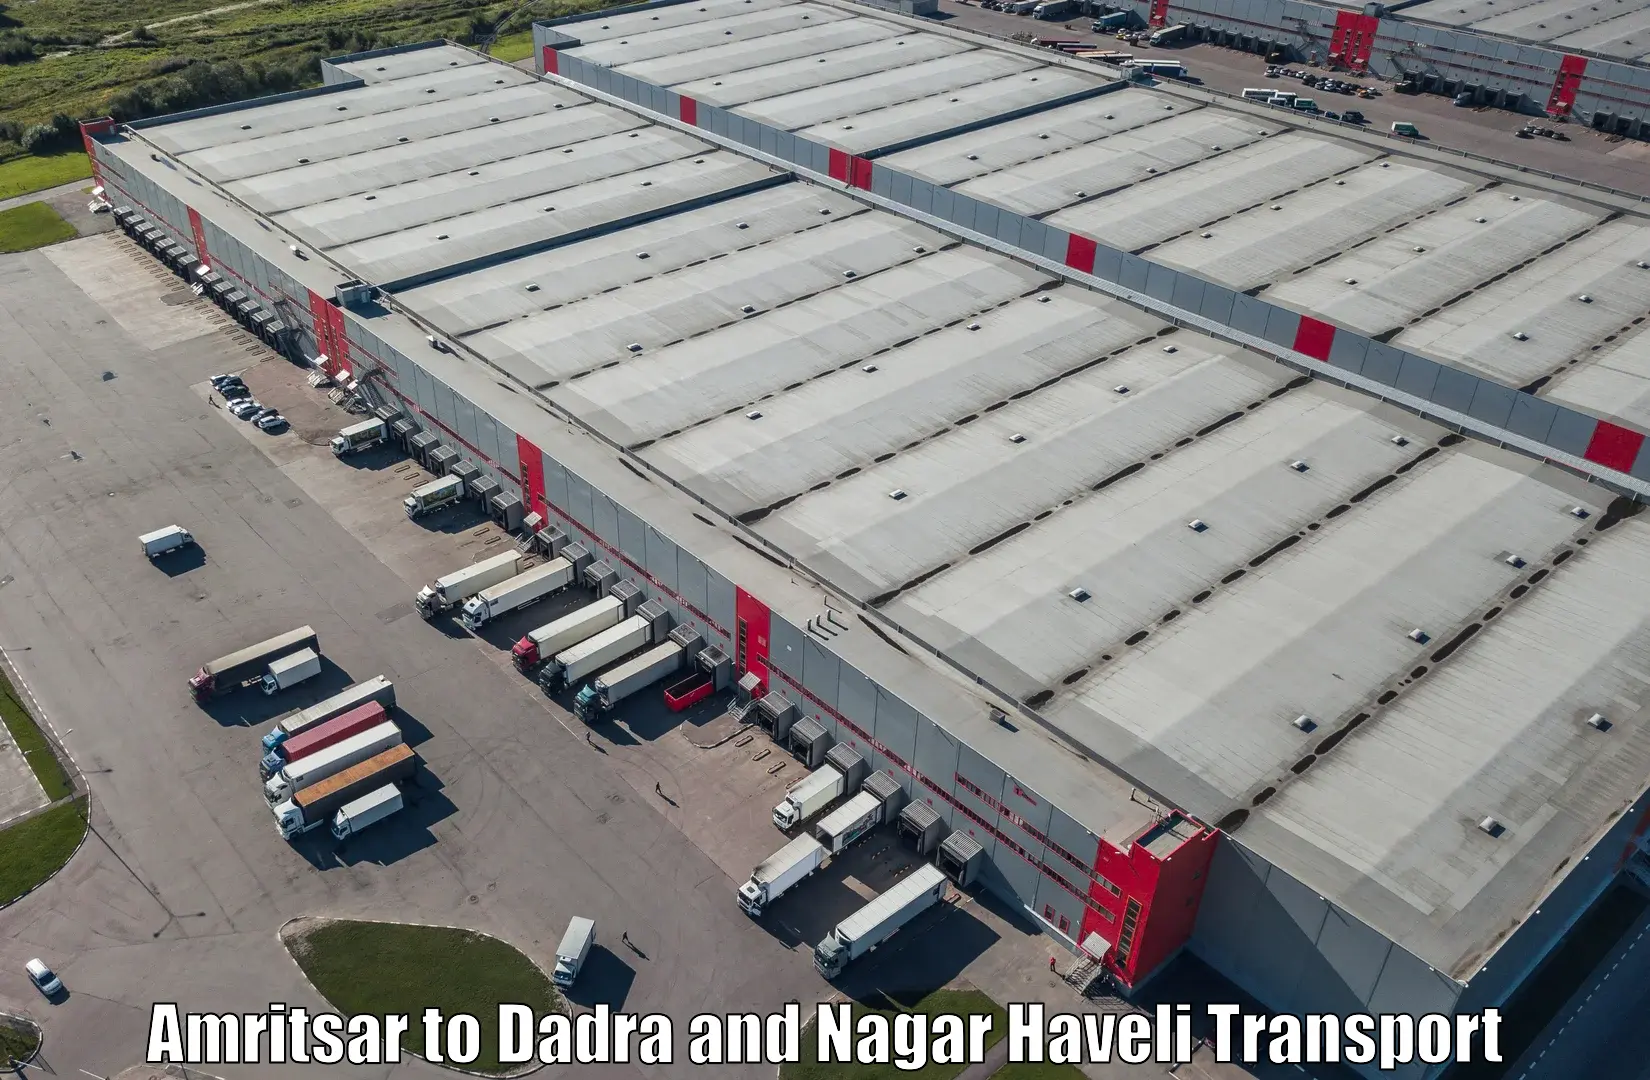 Package delivery services Amritsar to Dadra and Nagar Haveli